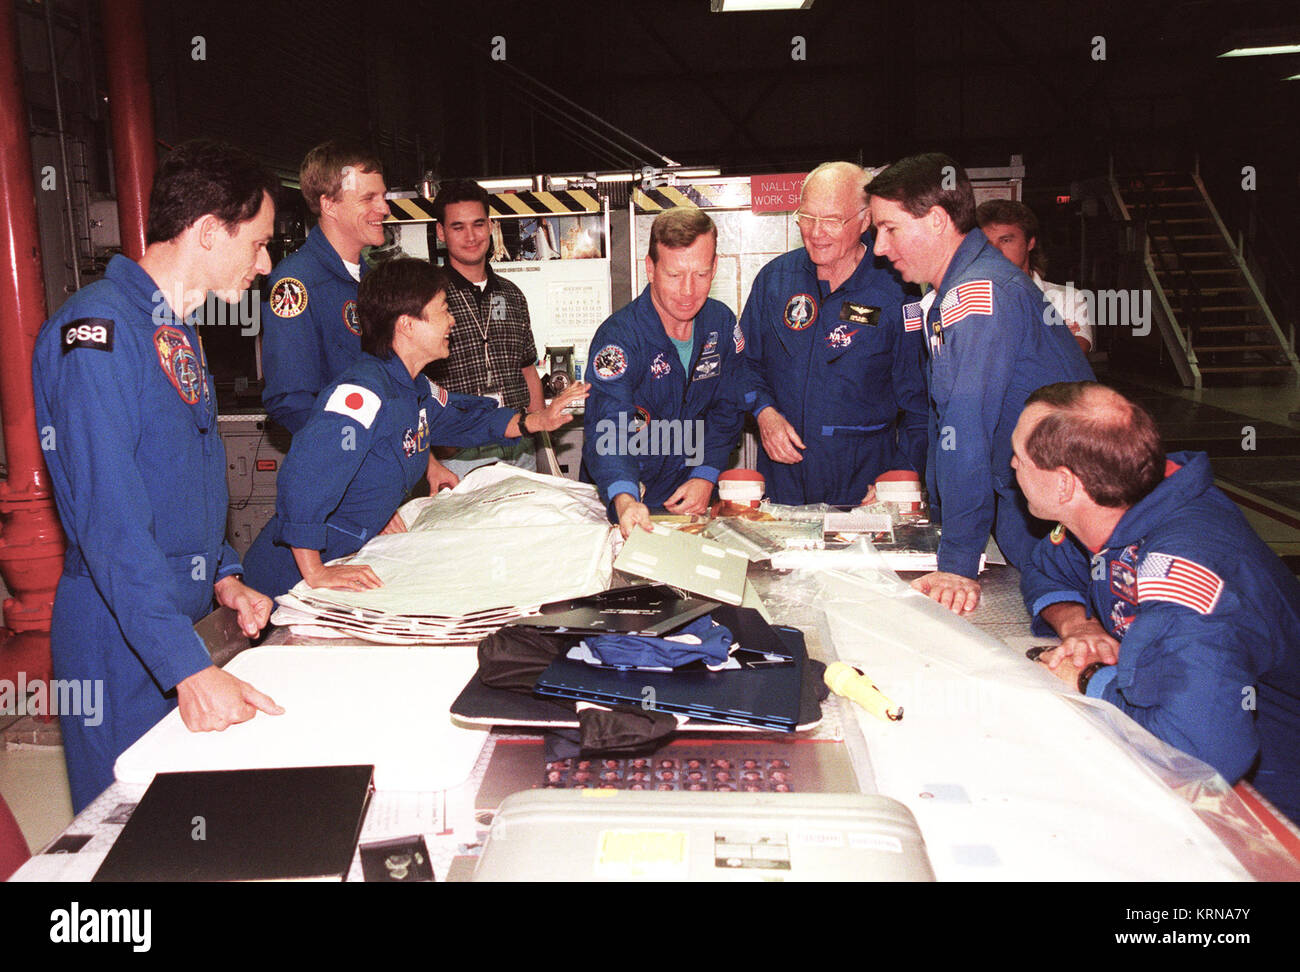 Sept. 3, 1998 -- Around a table in Bay 2 Orbiter Processing Facility at NASA's Kennedy Space Center in Florida, STS-95 crew members look over equipment during the Crew Equipment Interface Test (CEIT) for their mission. From left, they are Mission Specialist Pedro Duque, of the European Space Agency; Payload Specialist Chiaki Mukai, of the National Space Development Agency of Japan (NASDA); Mission Specialist Scott E. Parazynski, M.D.; Pilot Steven W. Lindsey; Payload Specialist John H. Glenn Jr., senator form Ohio; Mission Specialist Stephen K. Robinson; and Mission Commander Curtis L. Brown J Stock Photo